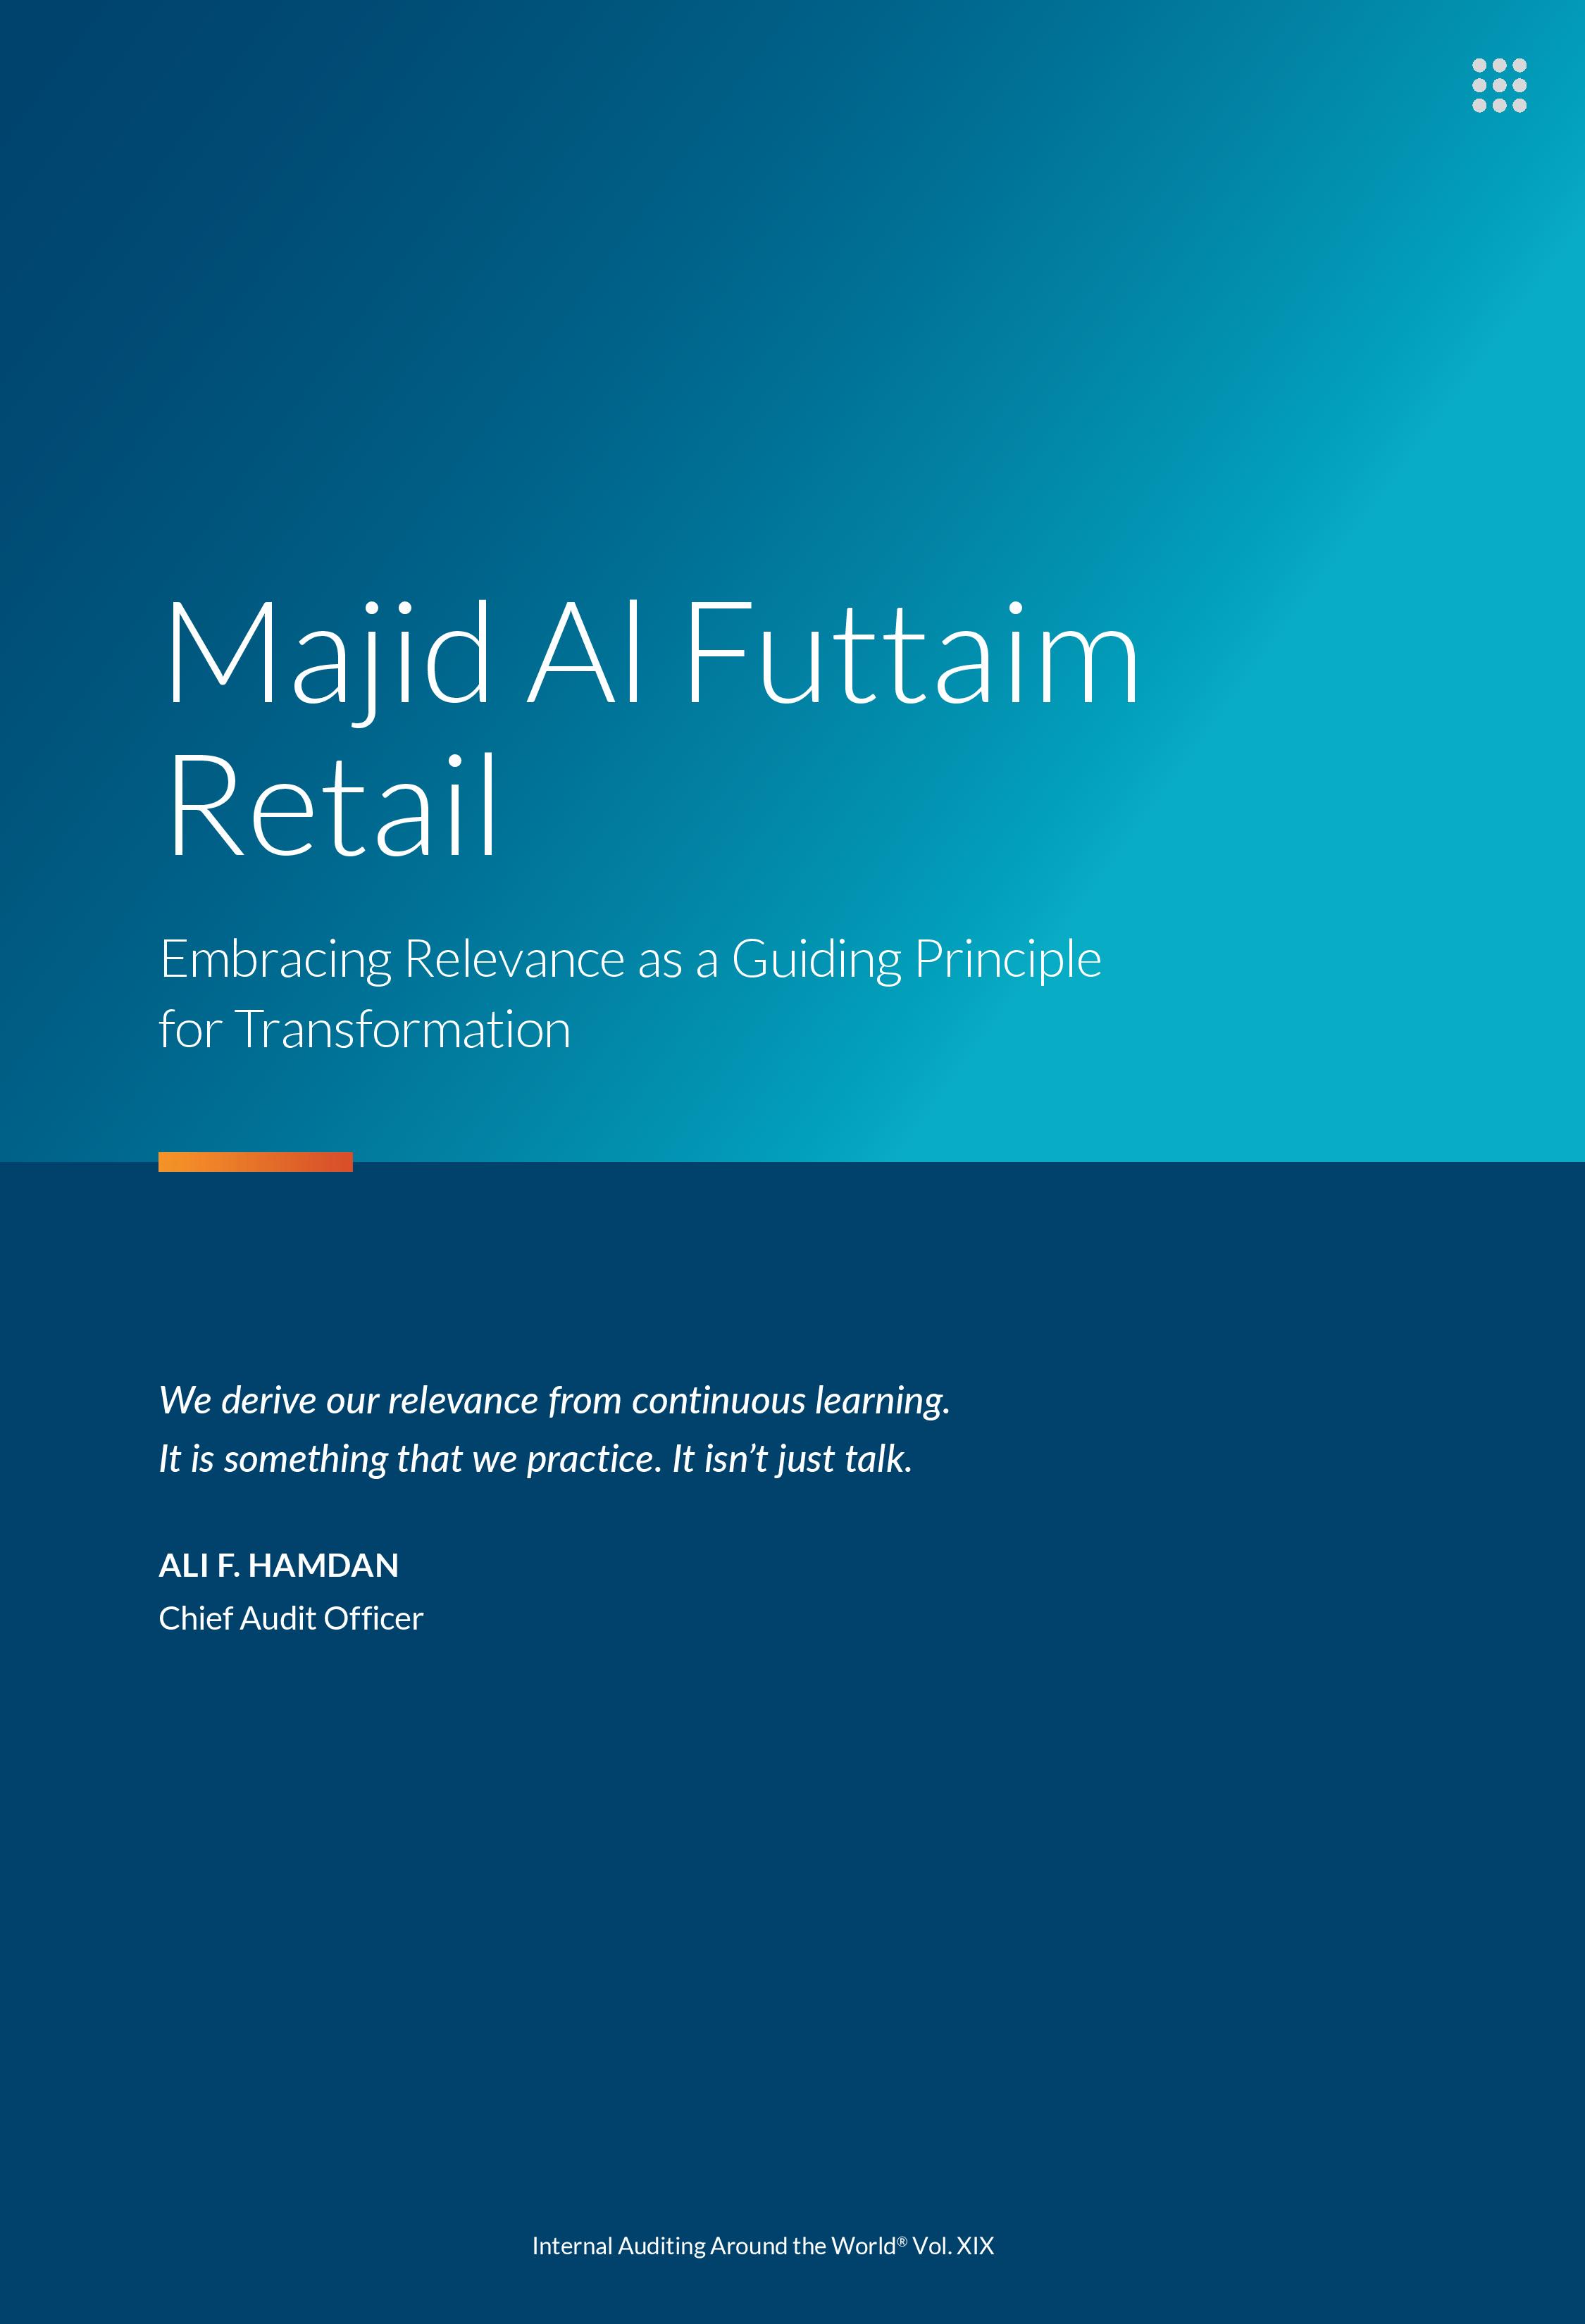 screenshot of the first page of Majid Al Futtaim Retail Embracing Relevance as a Guiding Principle for Transformation